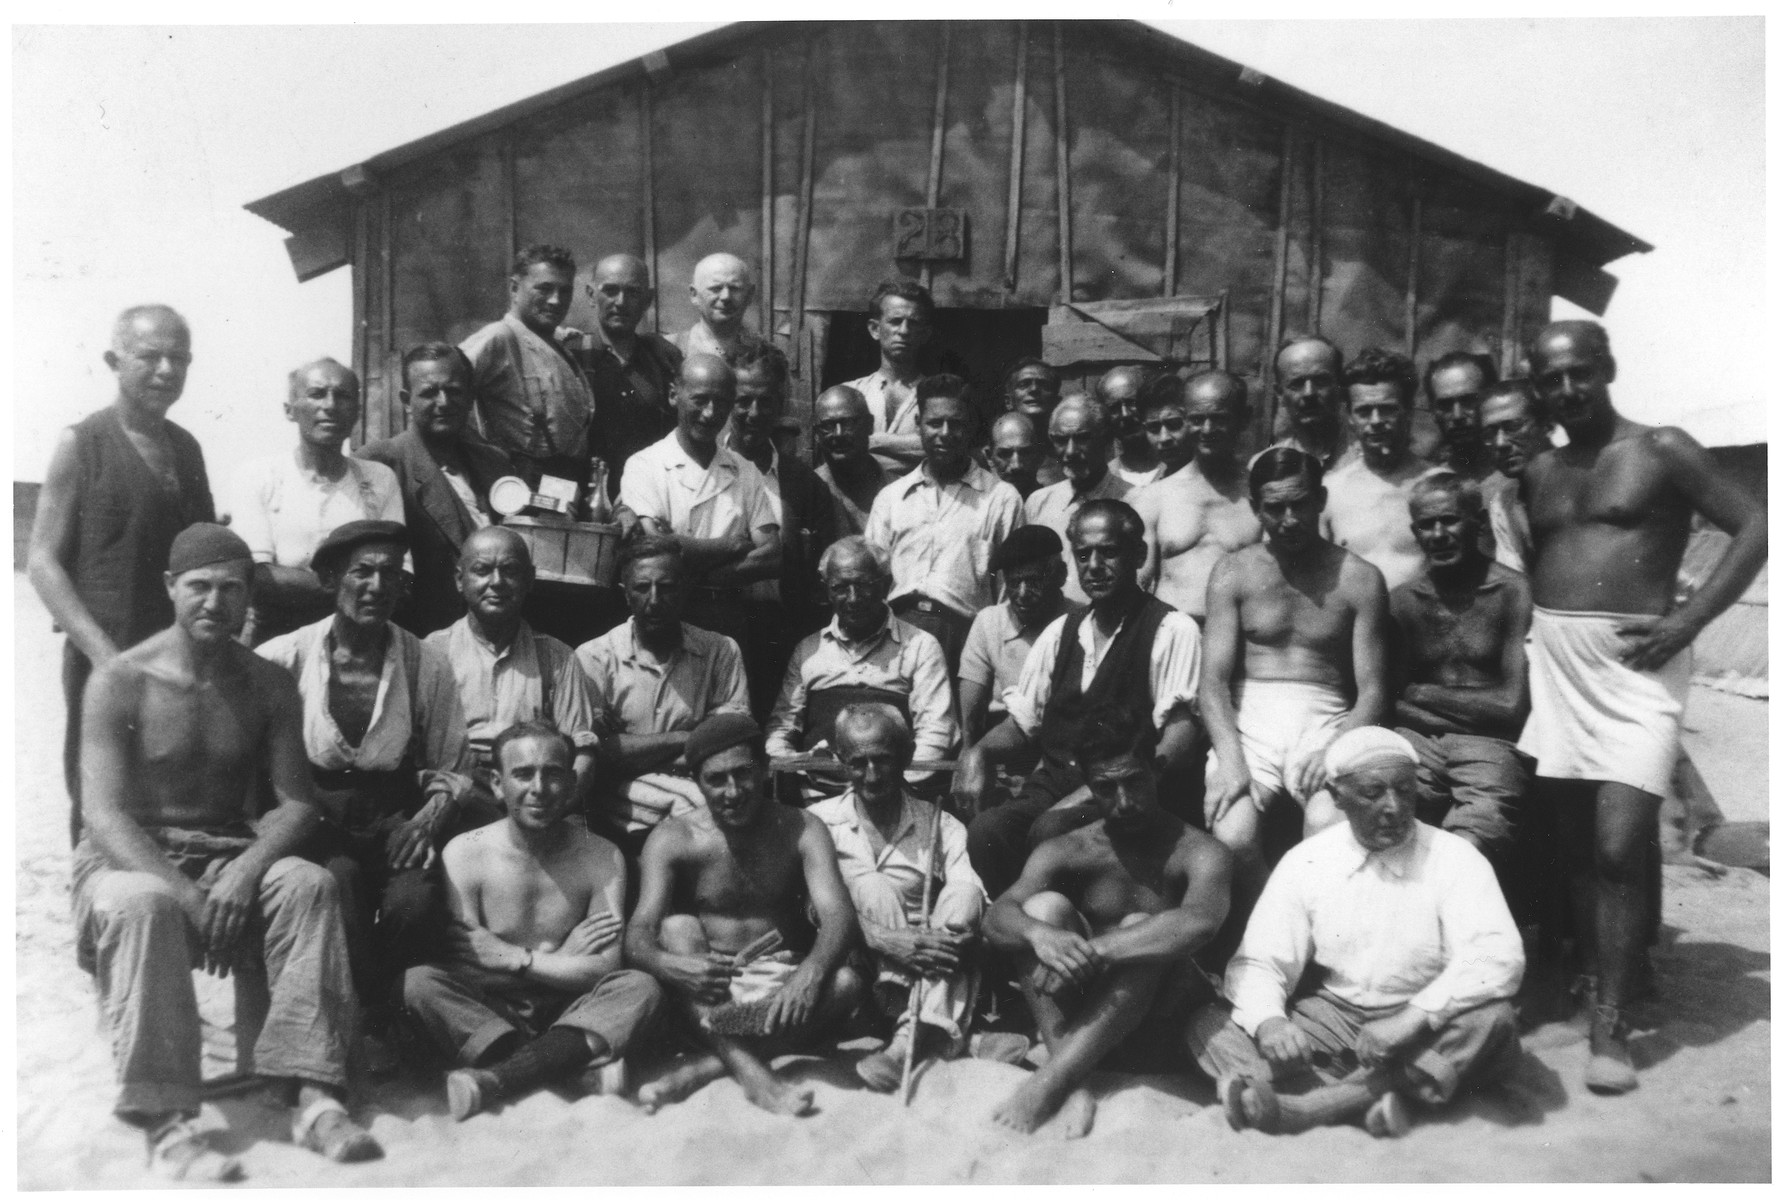 A group of male prisoners poses outside barrack no. 28 in the Saint Cyprien internment camp.

The man in the top row, second from the right is Moritz Adler.